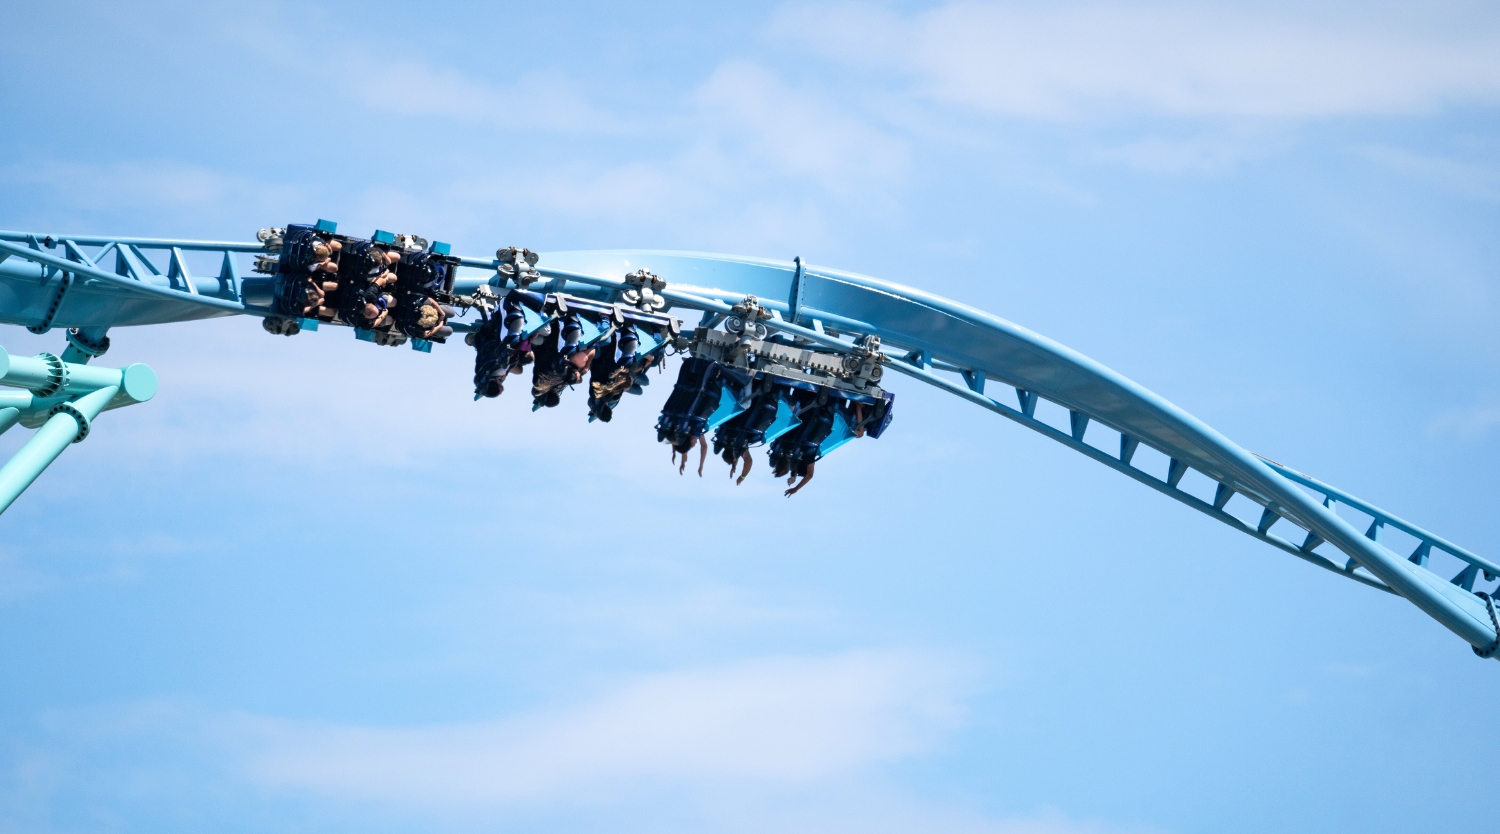 8 roller-coaster riders trapped upside down for hours in US World News pic